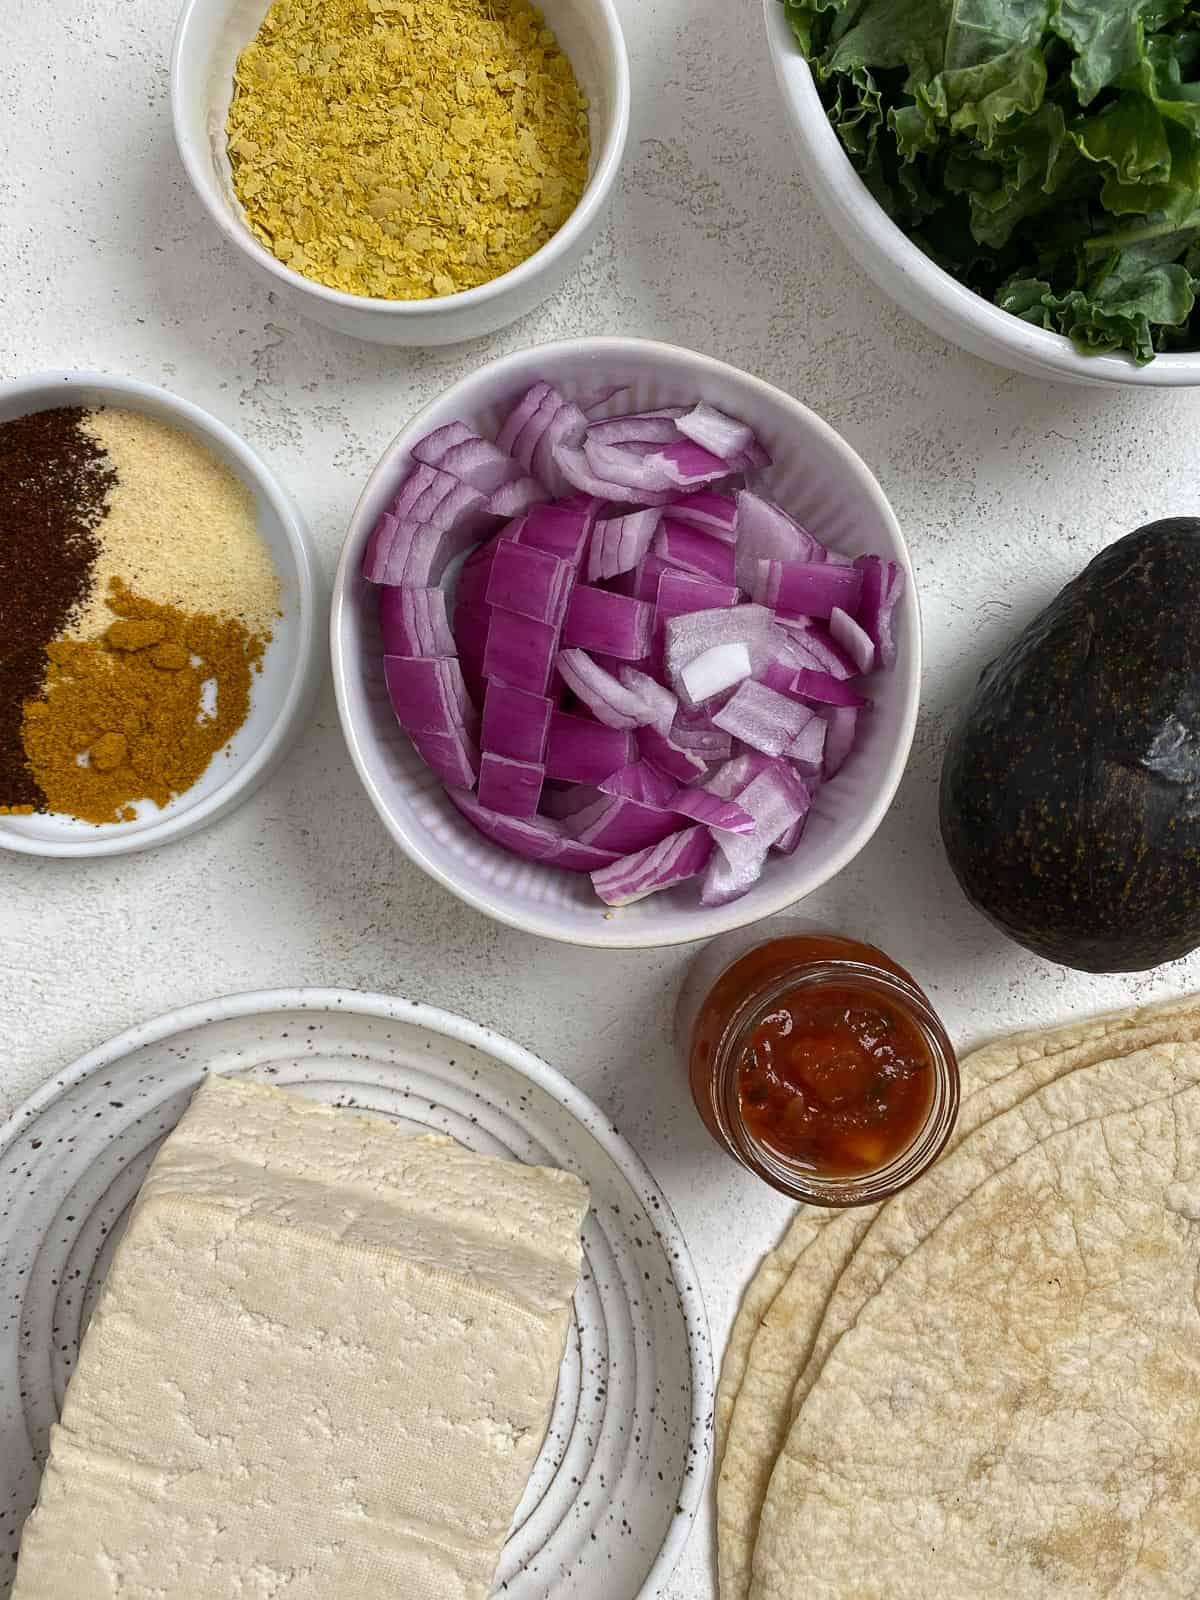 ingredients for Easy Scrambled Tofu Breakfast Burrito measured out against a light surface